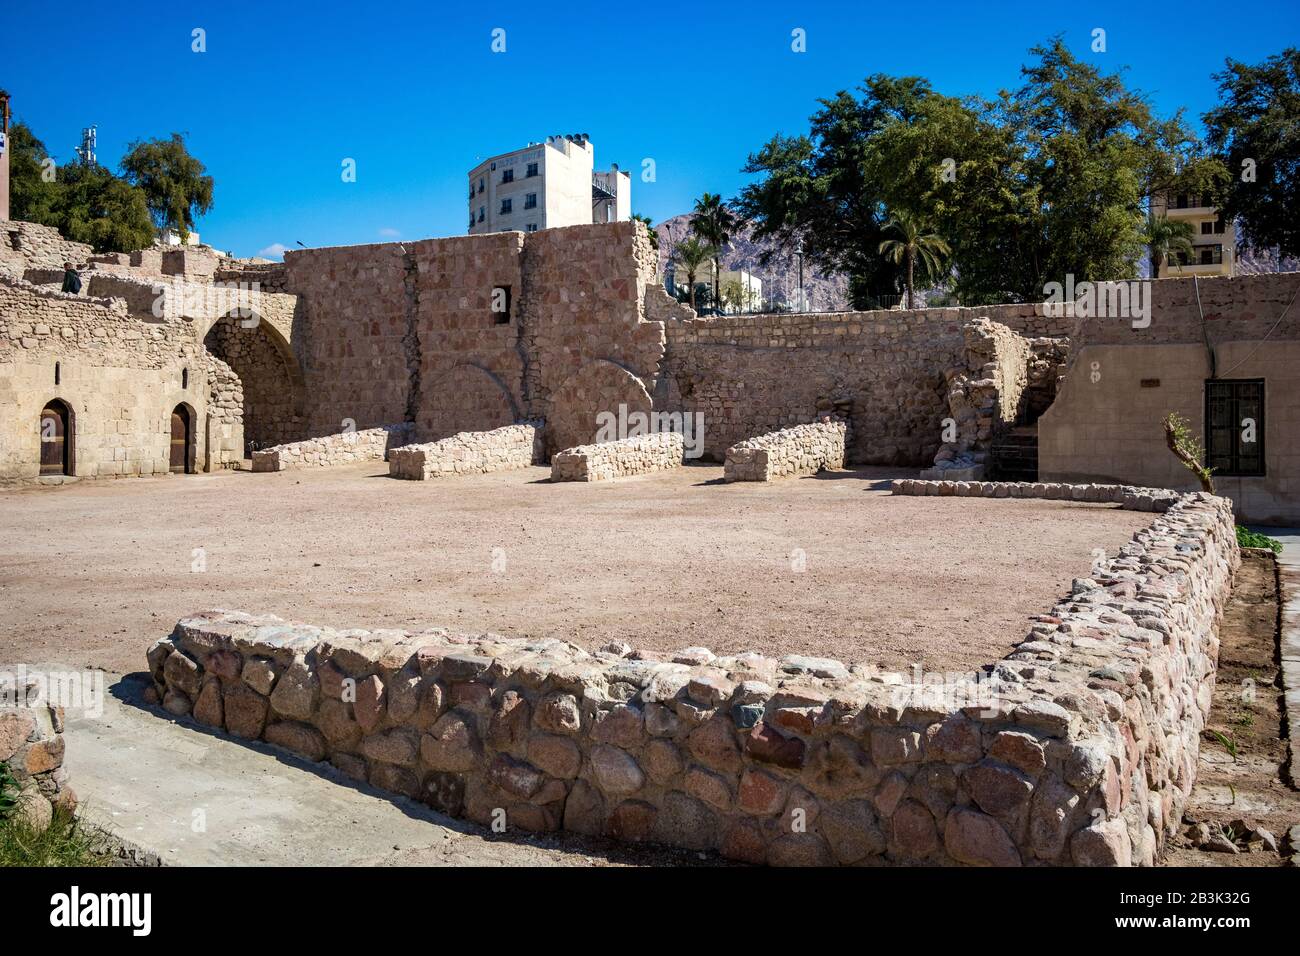 AQABA, JORDAN - JANUARY 31, 2020: Tourists walk on fortress walls. Court yard view of Aqaba Castle. The main fort square is empty under the sunlight. Sunny winter day. Clear cloudless blue sky Stock Photo